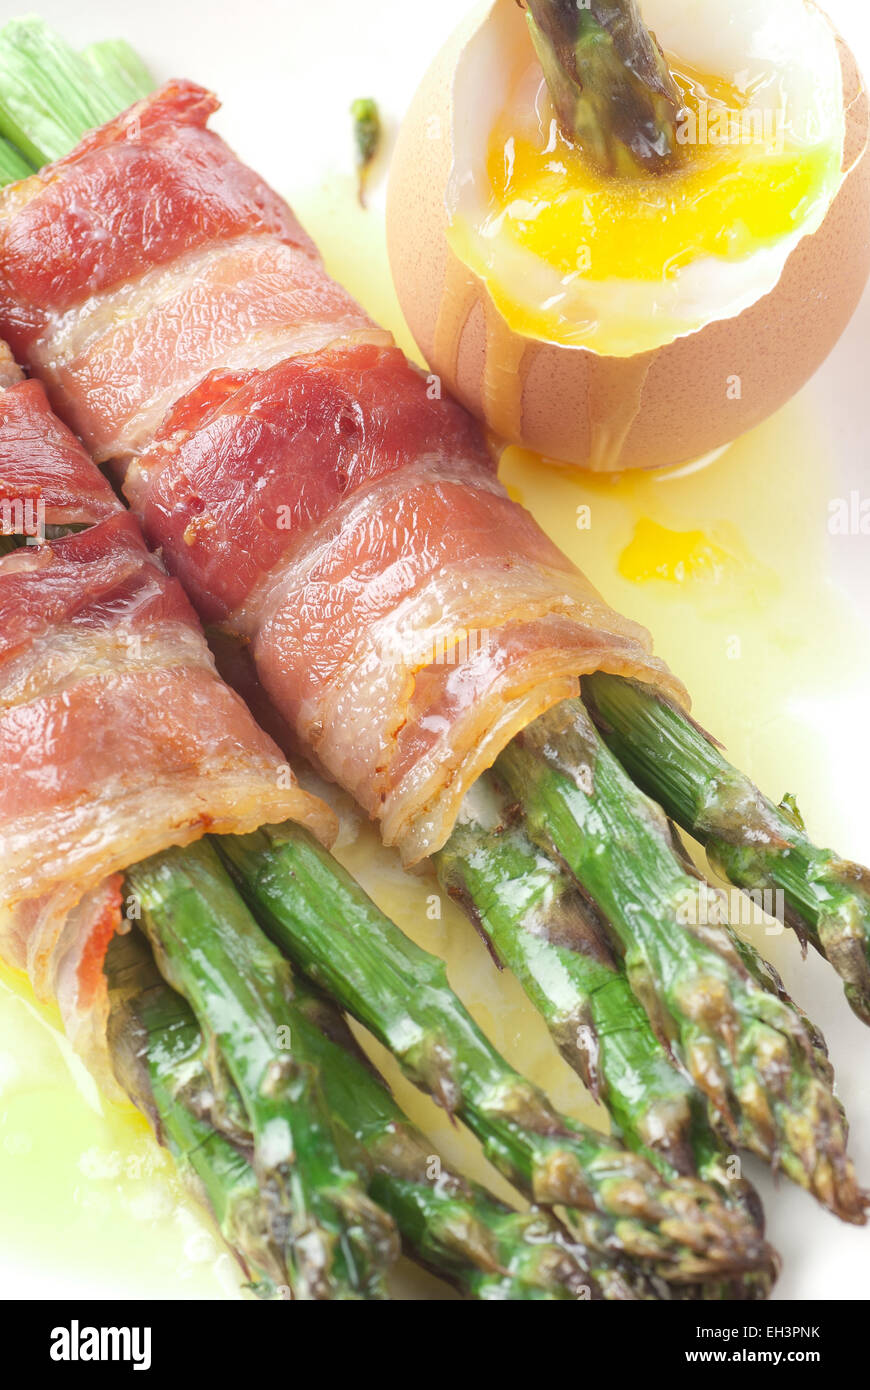 Oven baked bacon wrapped asparagus, served with melted butter and boiled egg. Stock Photo